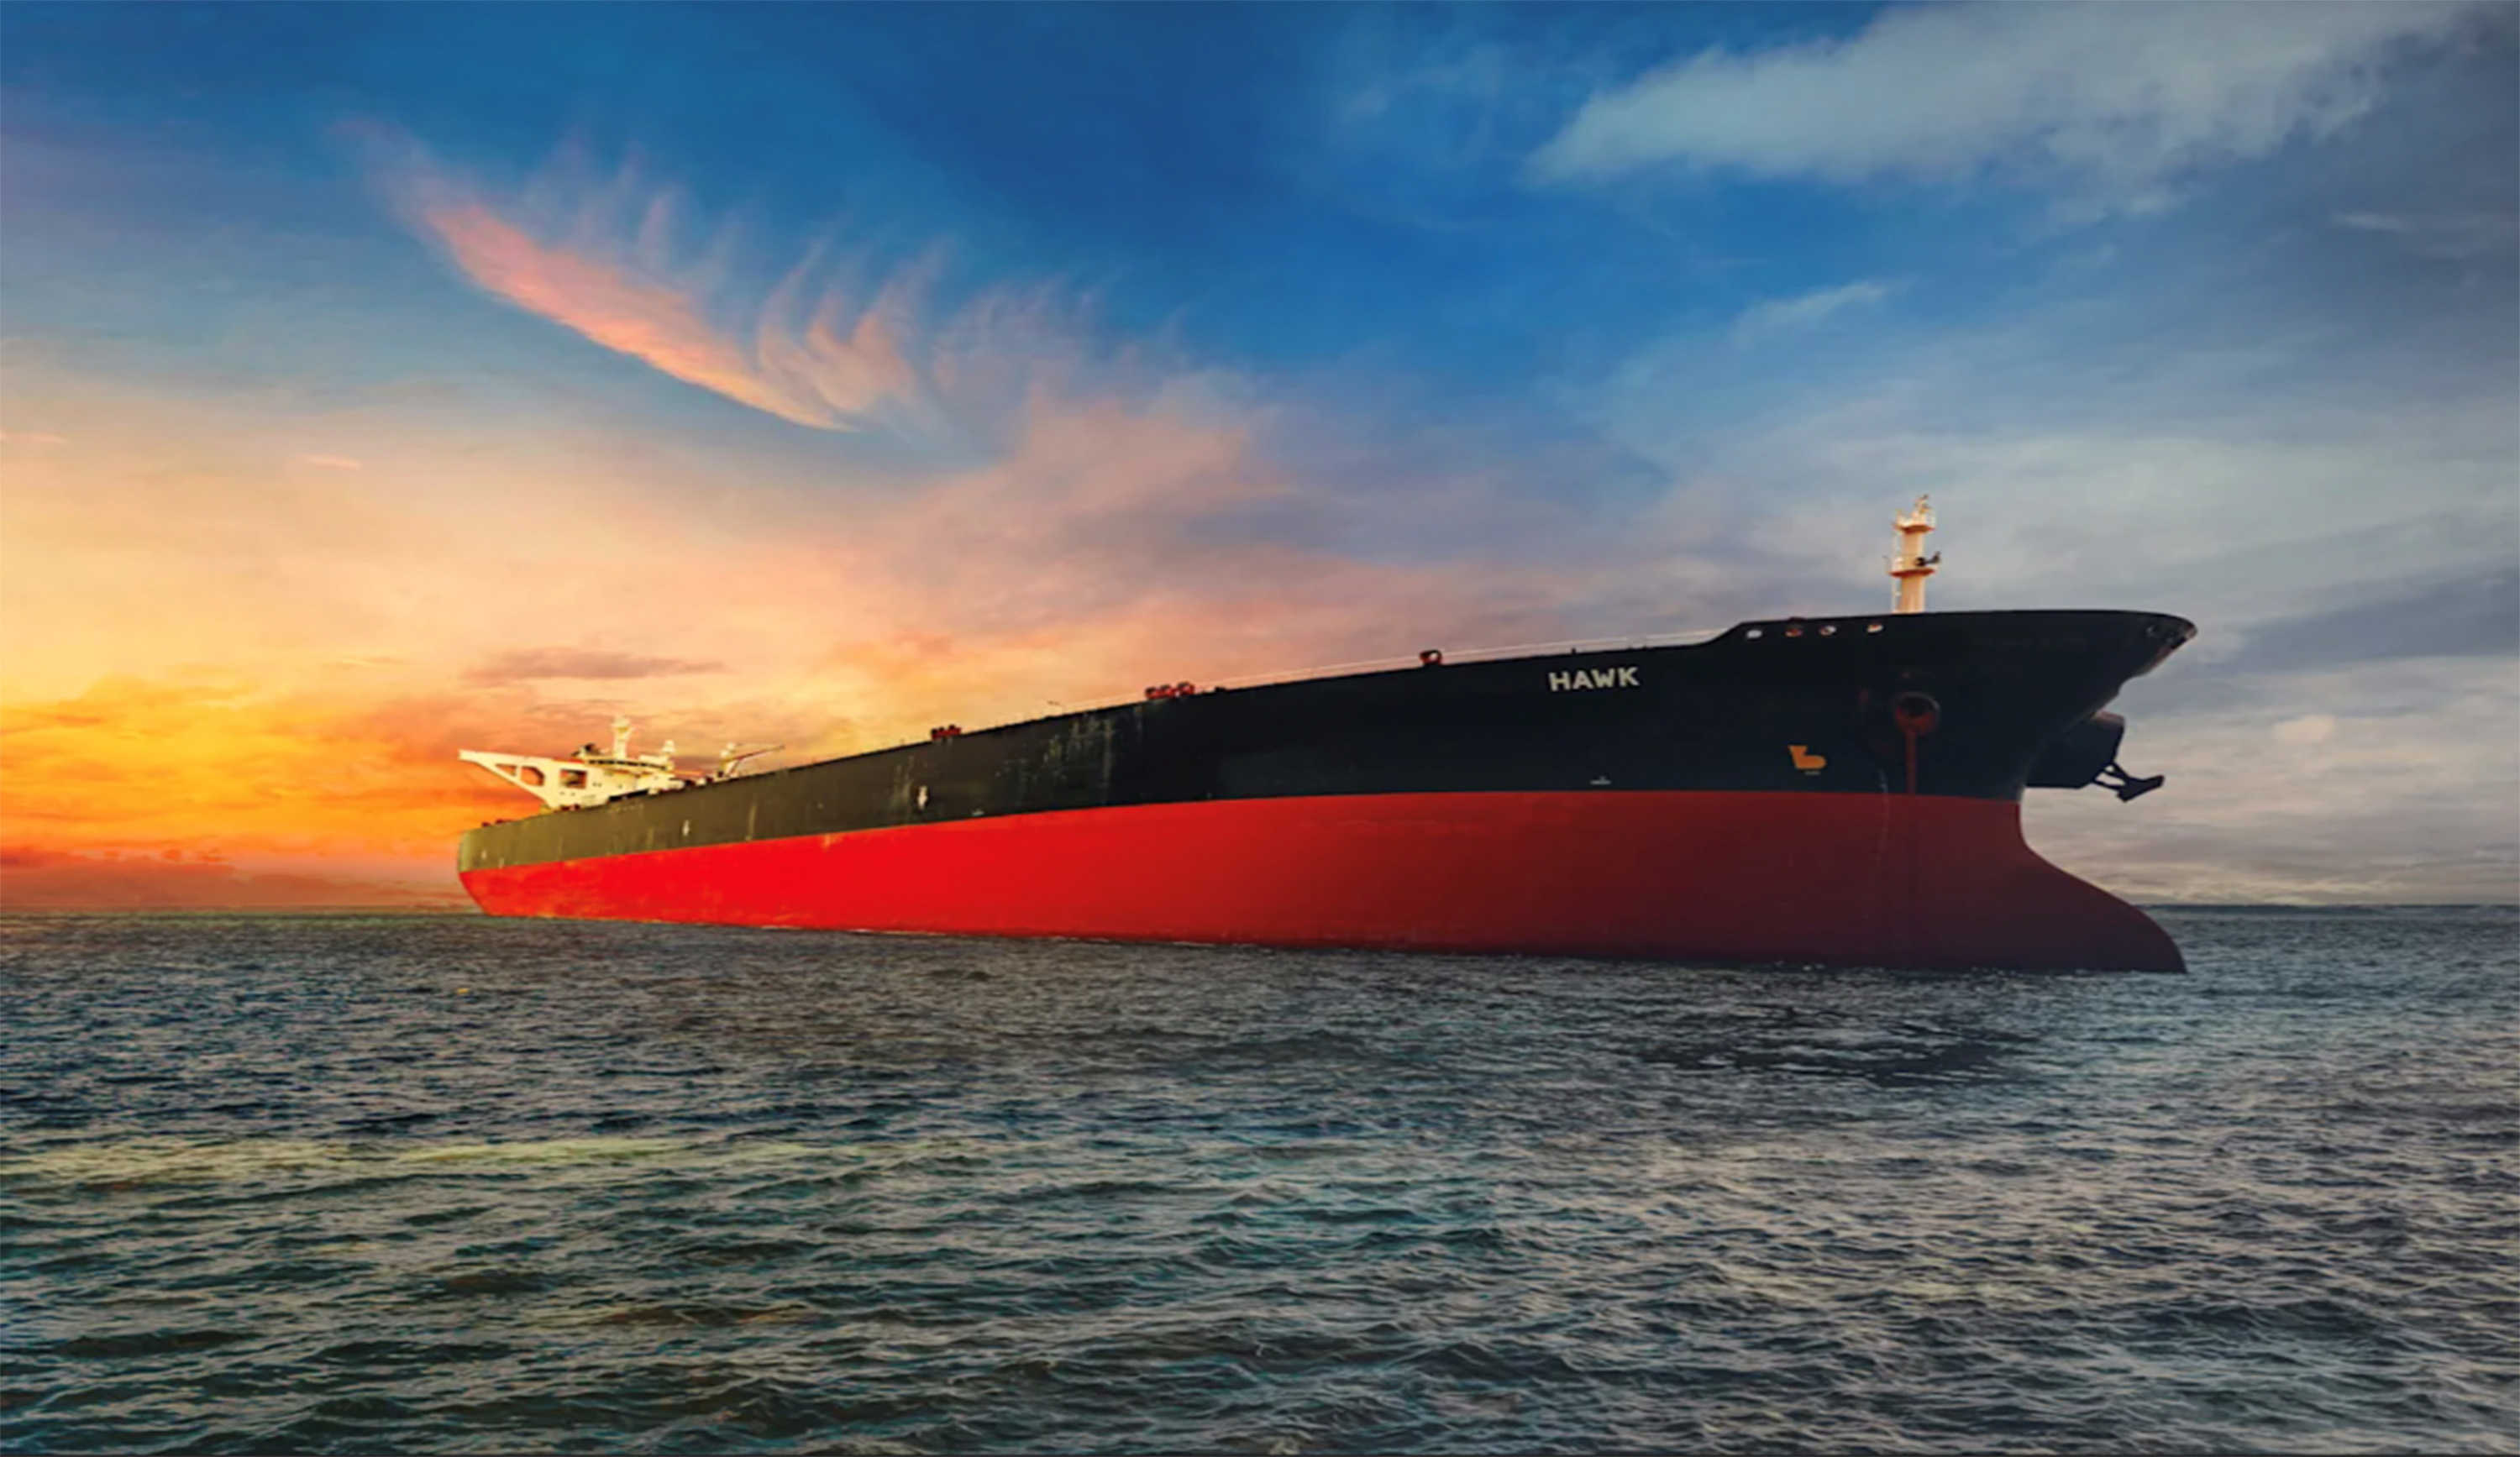 KM signs with global offshore production contractor Yinson for the supply of KONGSBERG’s E-house, electrical, control, safeguarding and telecommunication equipment solutions. The contract for the floating production storage and offloading (FPSO) vessel Maria Quitéria also includes service support.